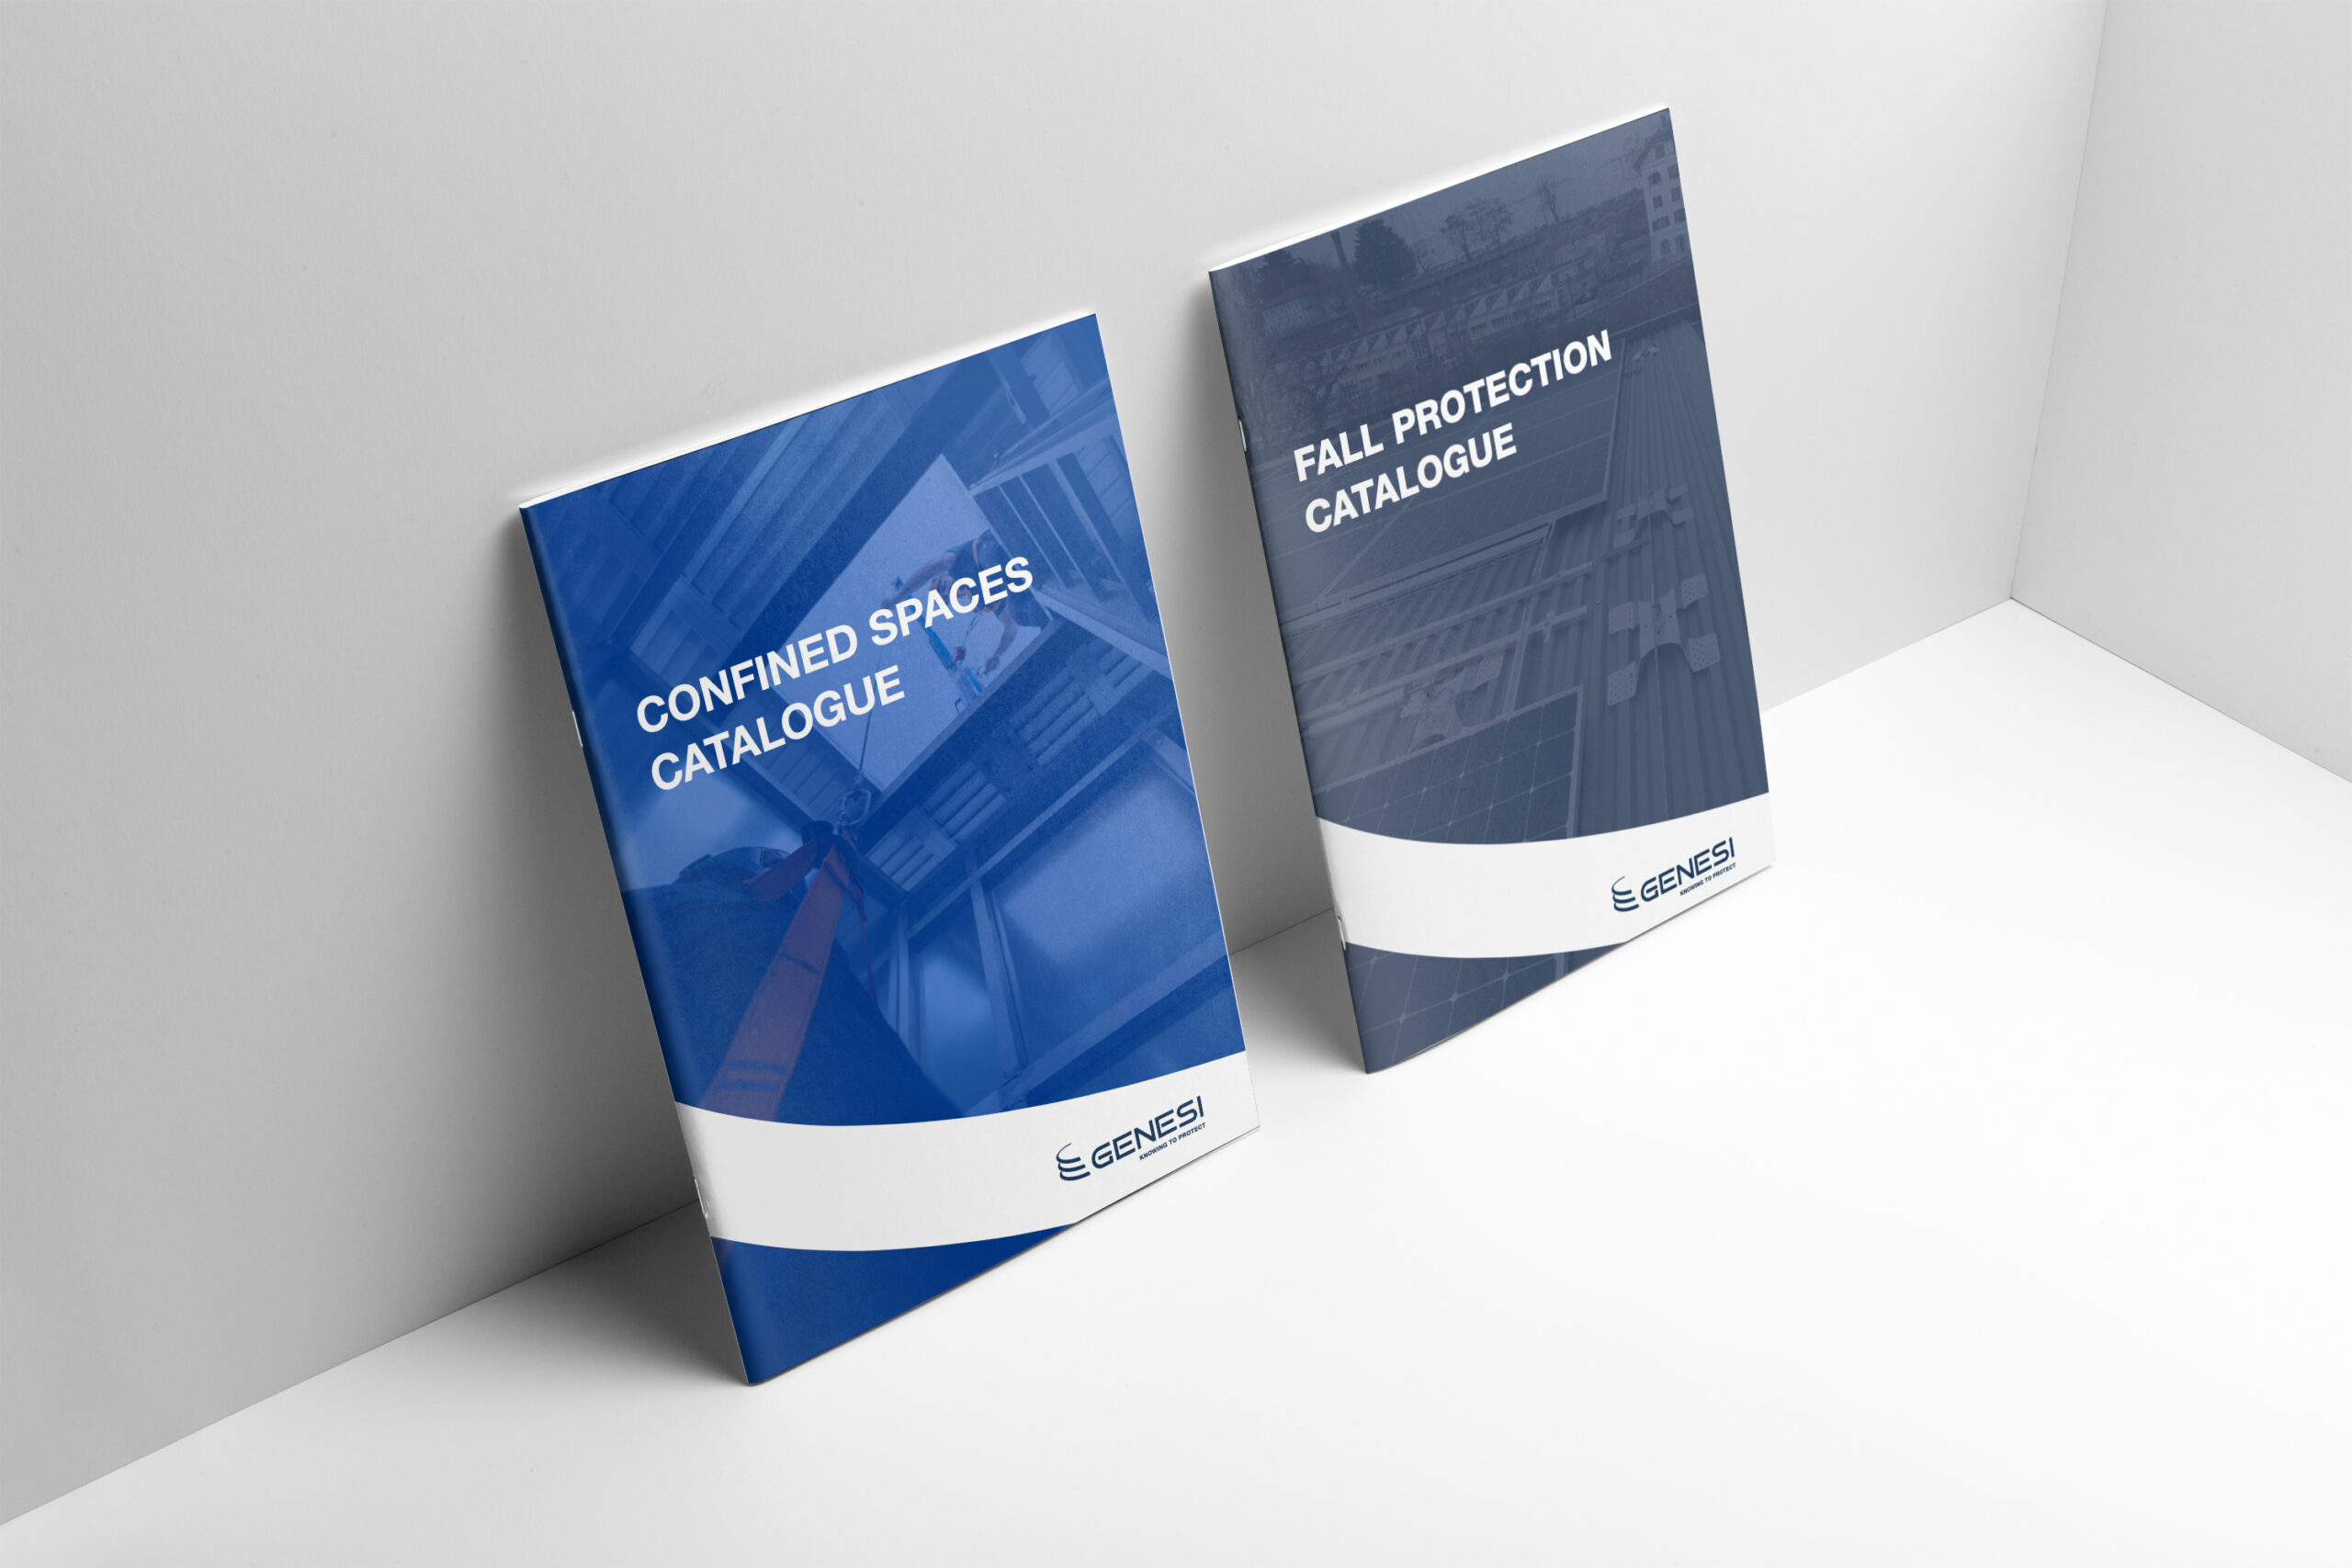 genesi protection catalogues covers